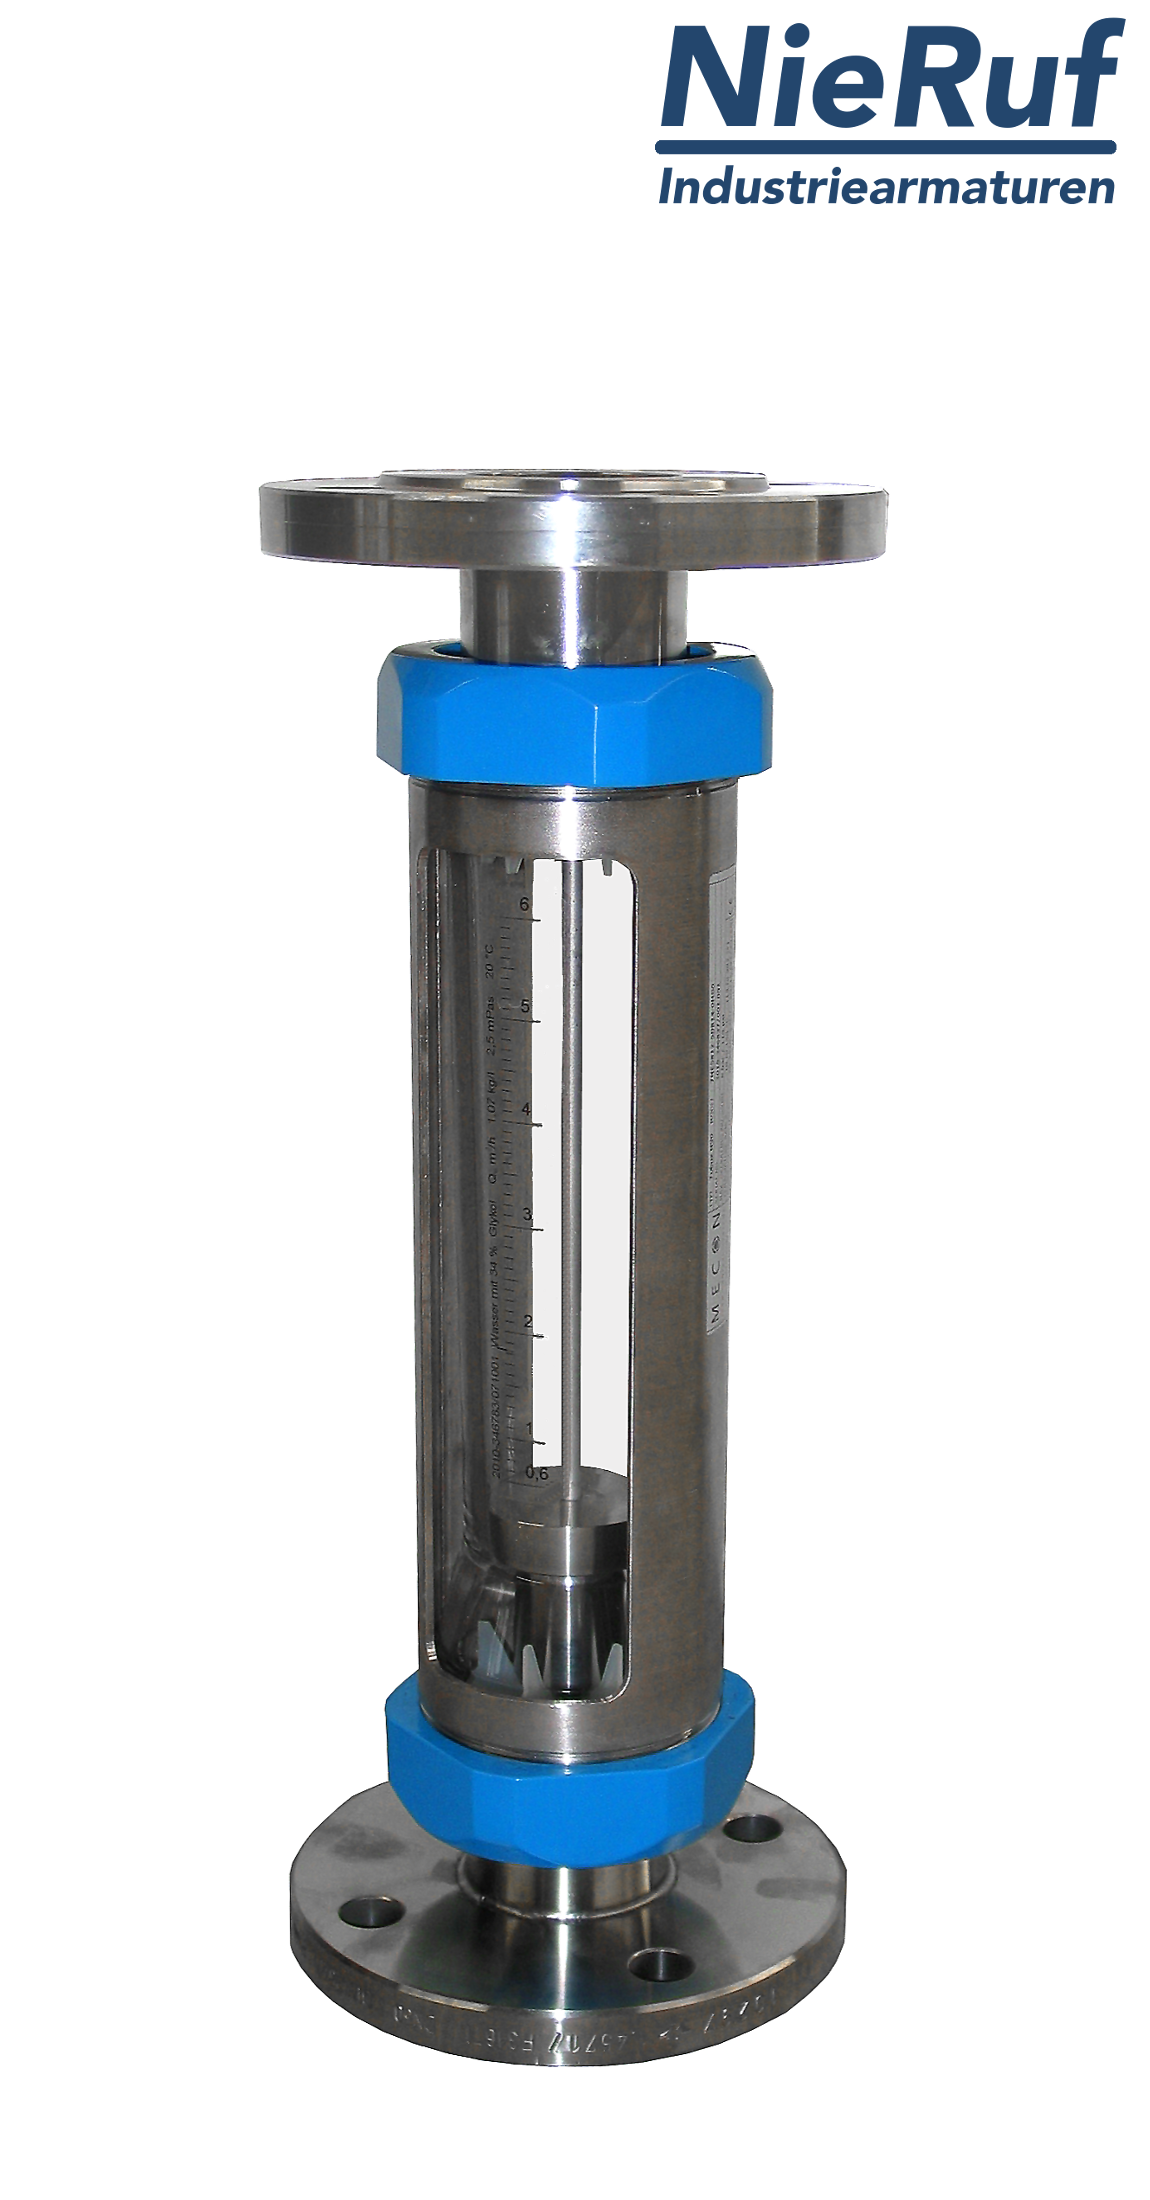 Variable area flowmeter stainless steel + borosilicate flange DN10 1.6 - 16.0 l/h water FKM